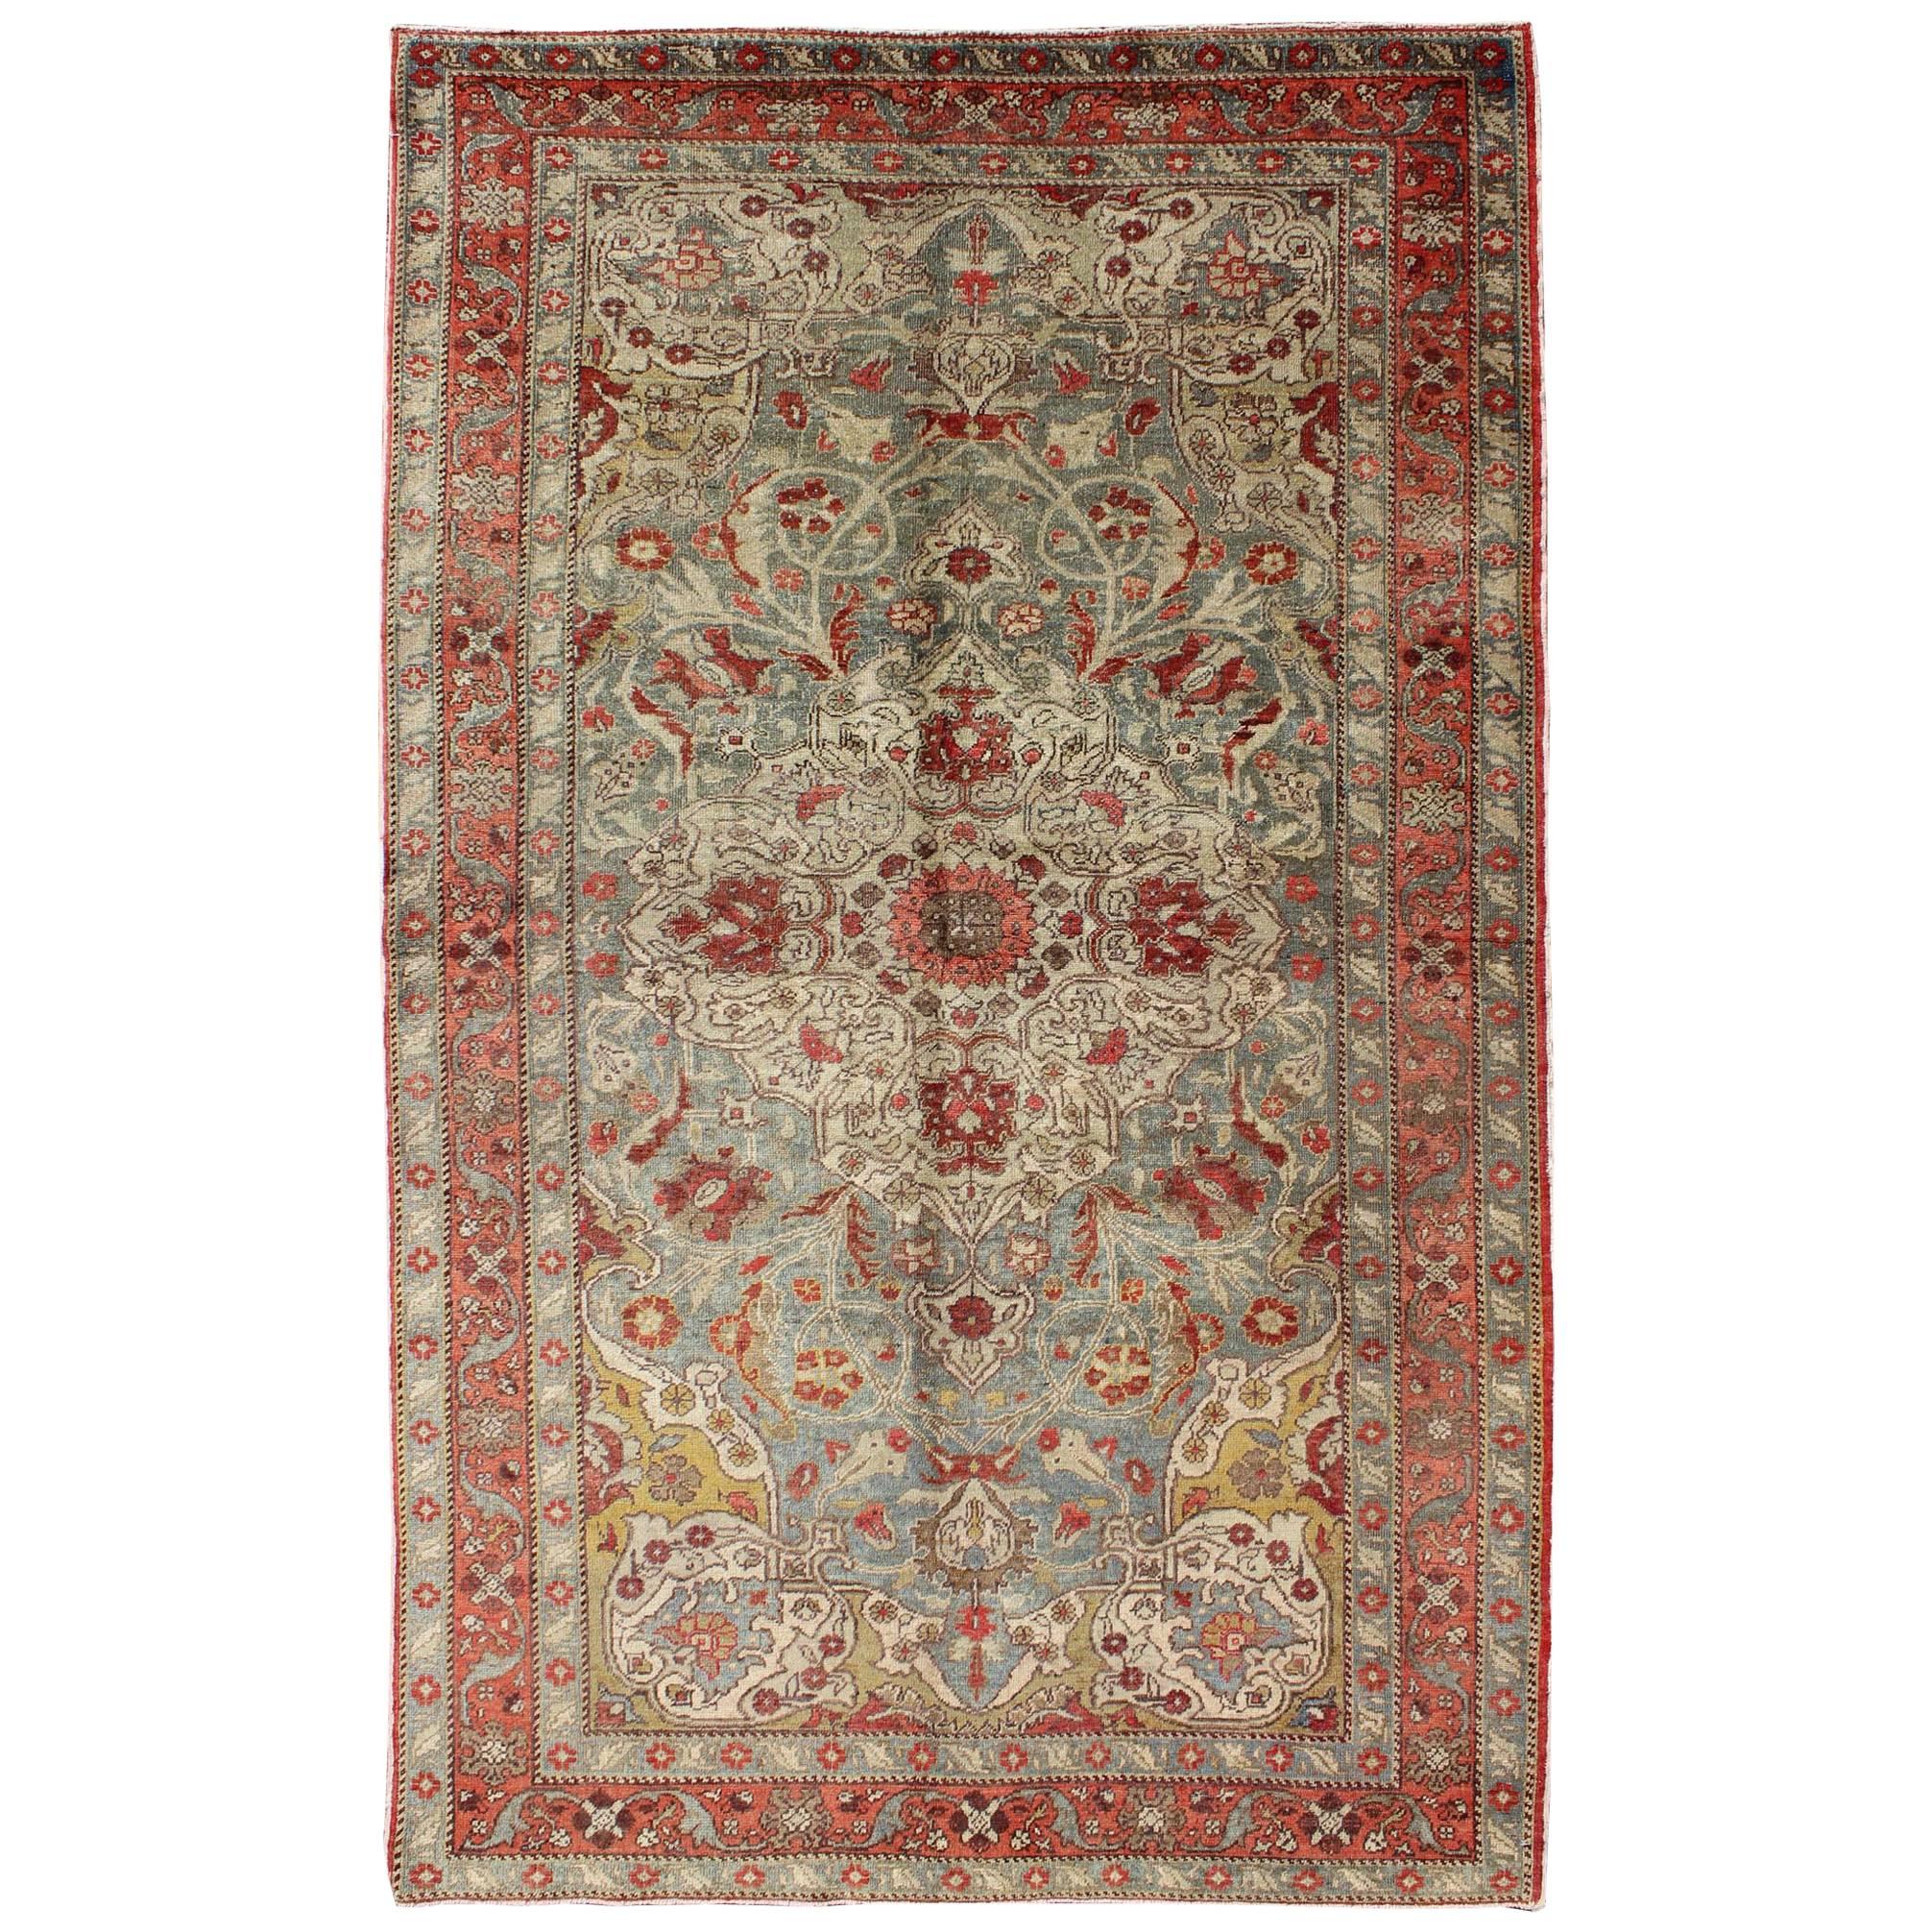 Floral Medallion Antique Turkey Sivas Rug in Light Blue, Red, Ivory, Chartreuse